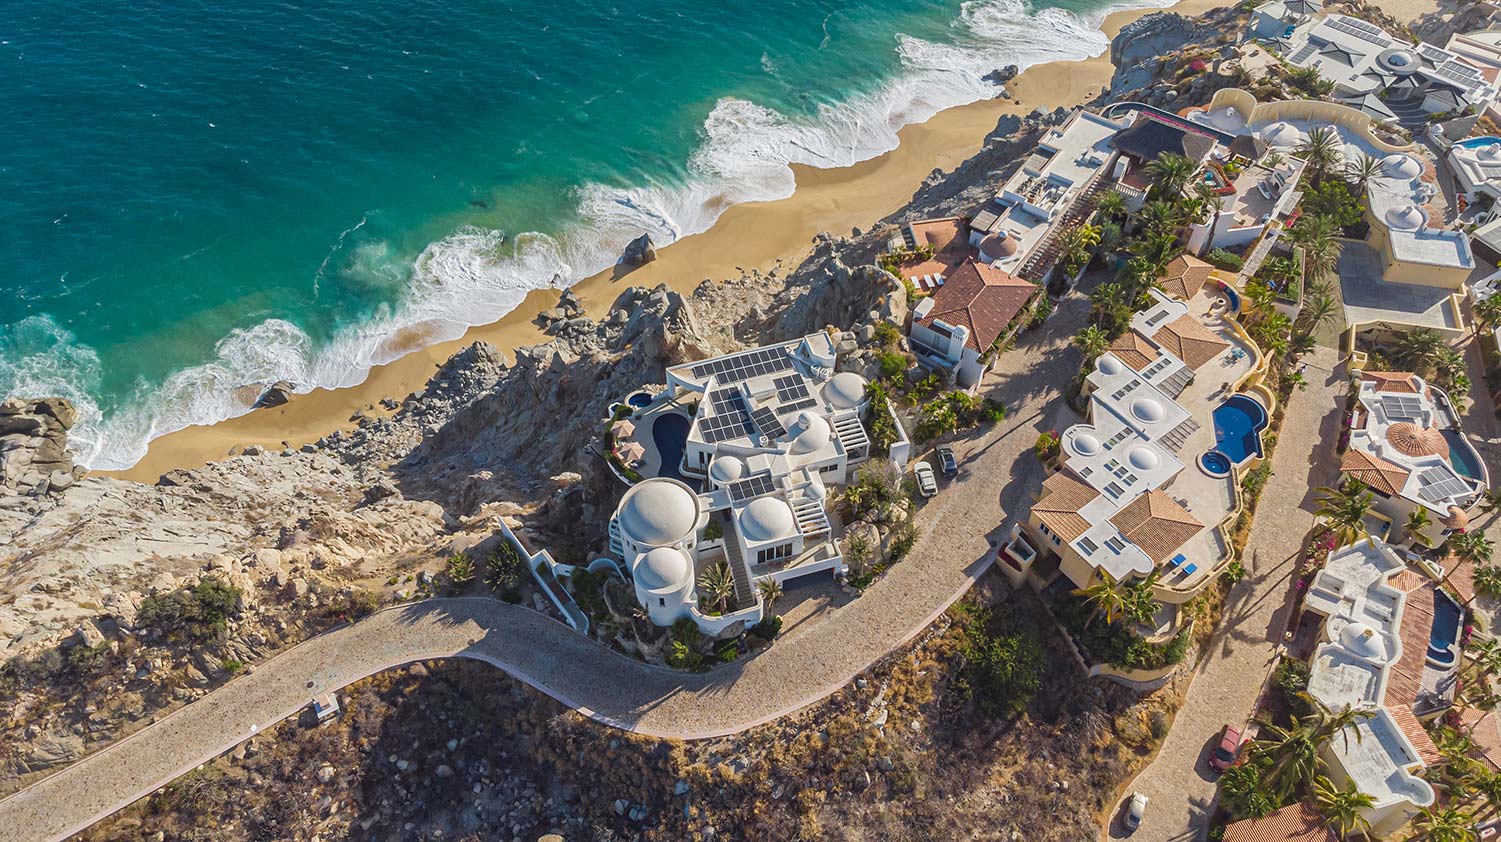 One of the areas to own property in Cabo.